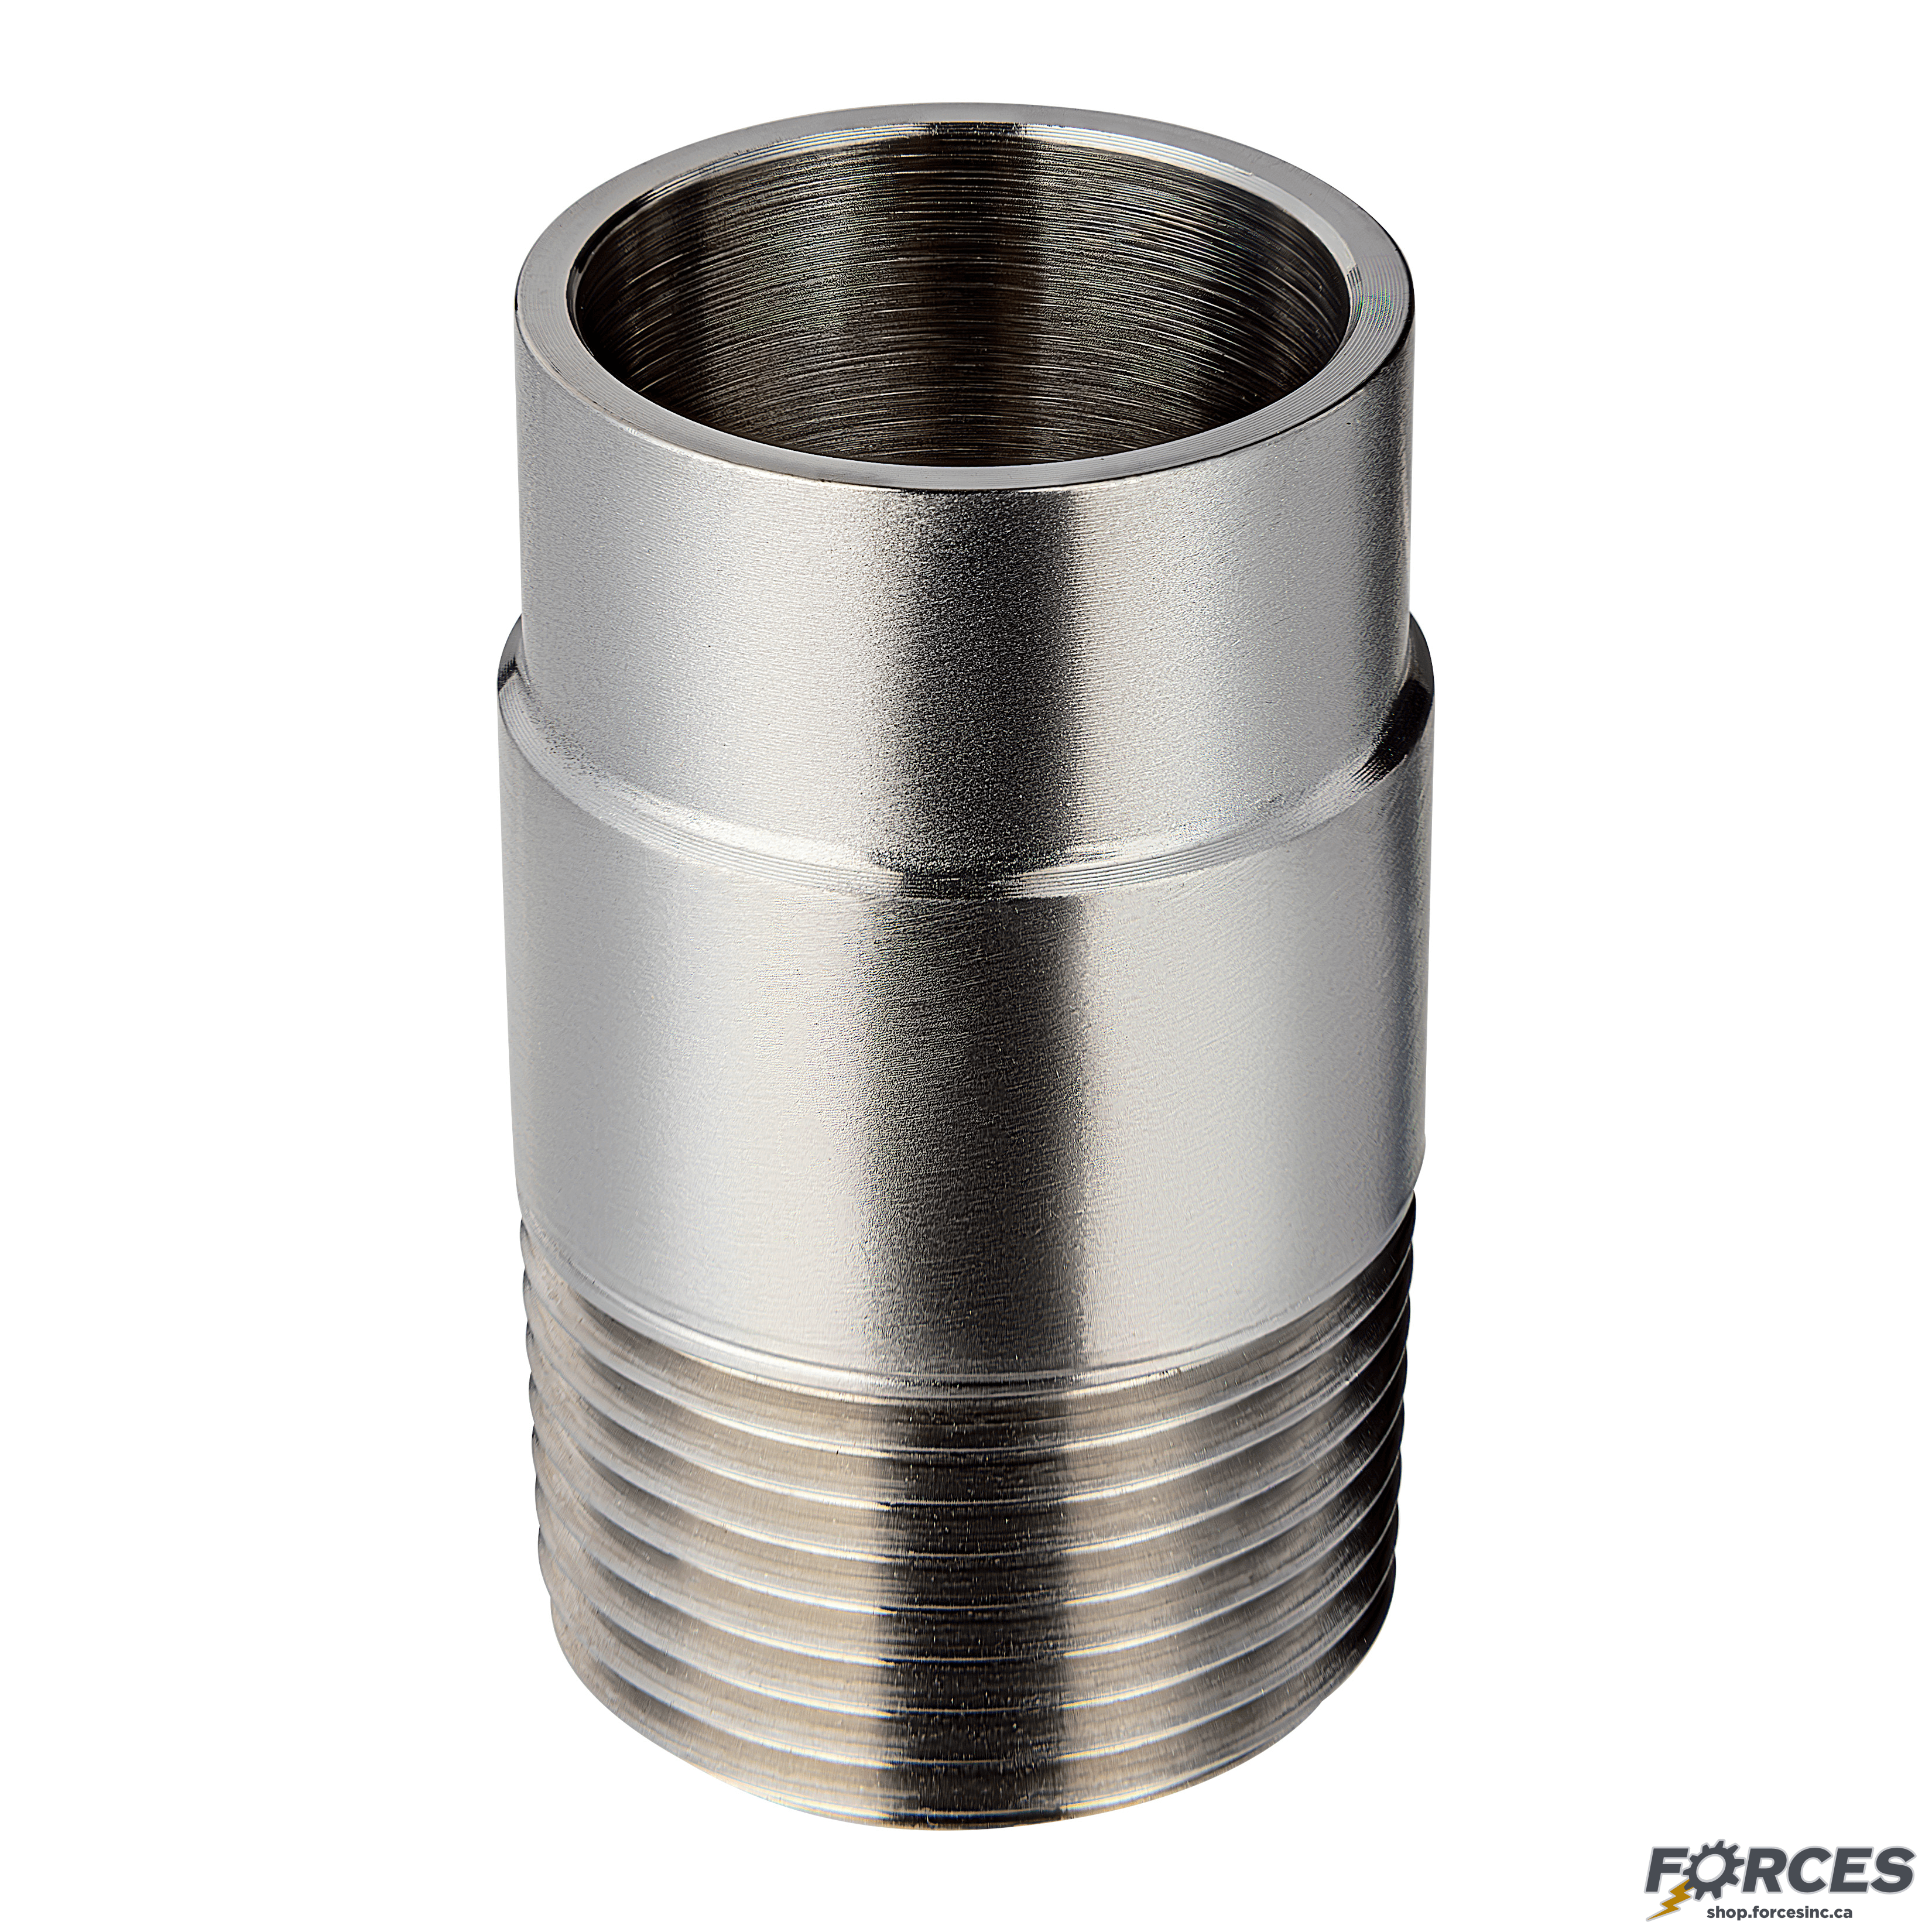 2" x 2" Butt Weld x Male NPT Adapter - Stainless Steel 316 - Forces Inc